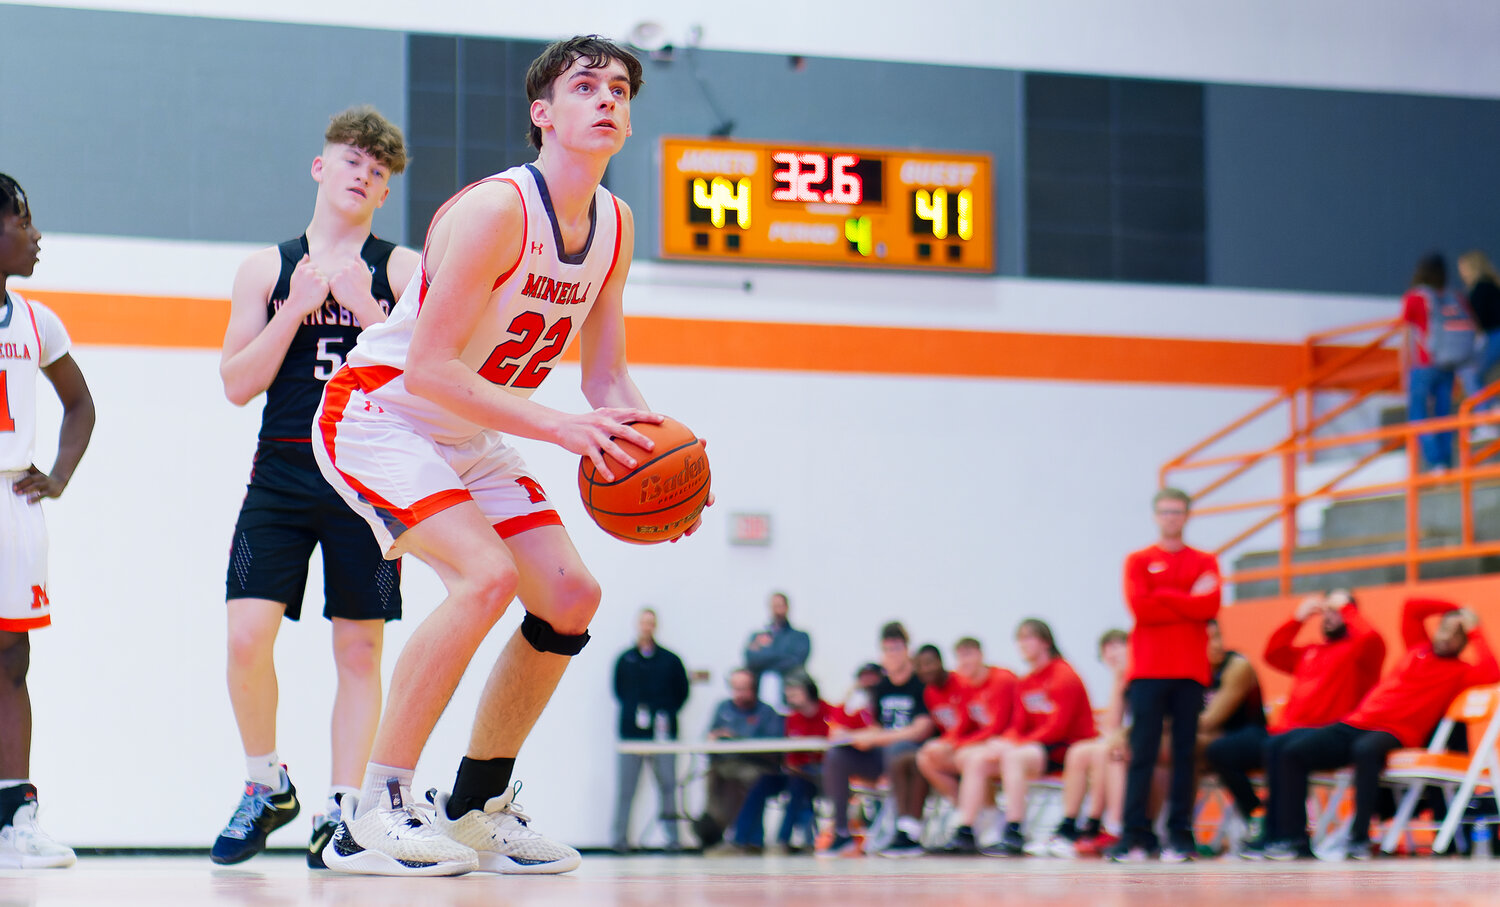 Zane Strange hit two free throws with 32 seconds left against Winnsboro to help secure the win and open a 5-point lead. [see several more shots]